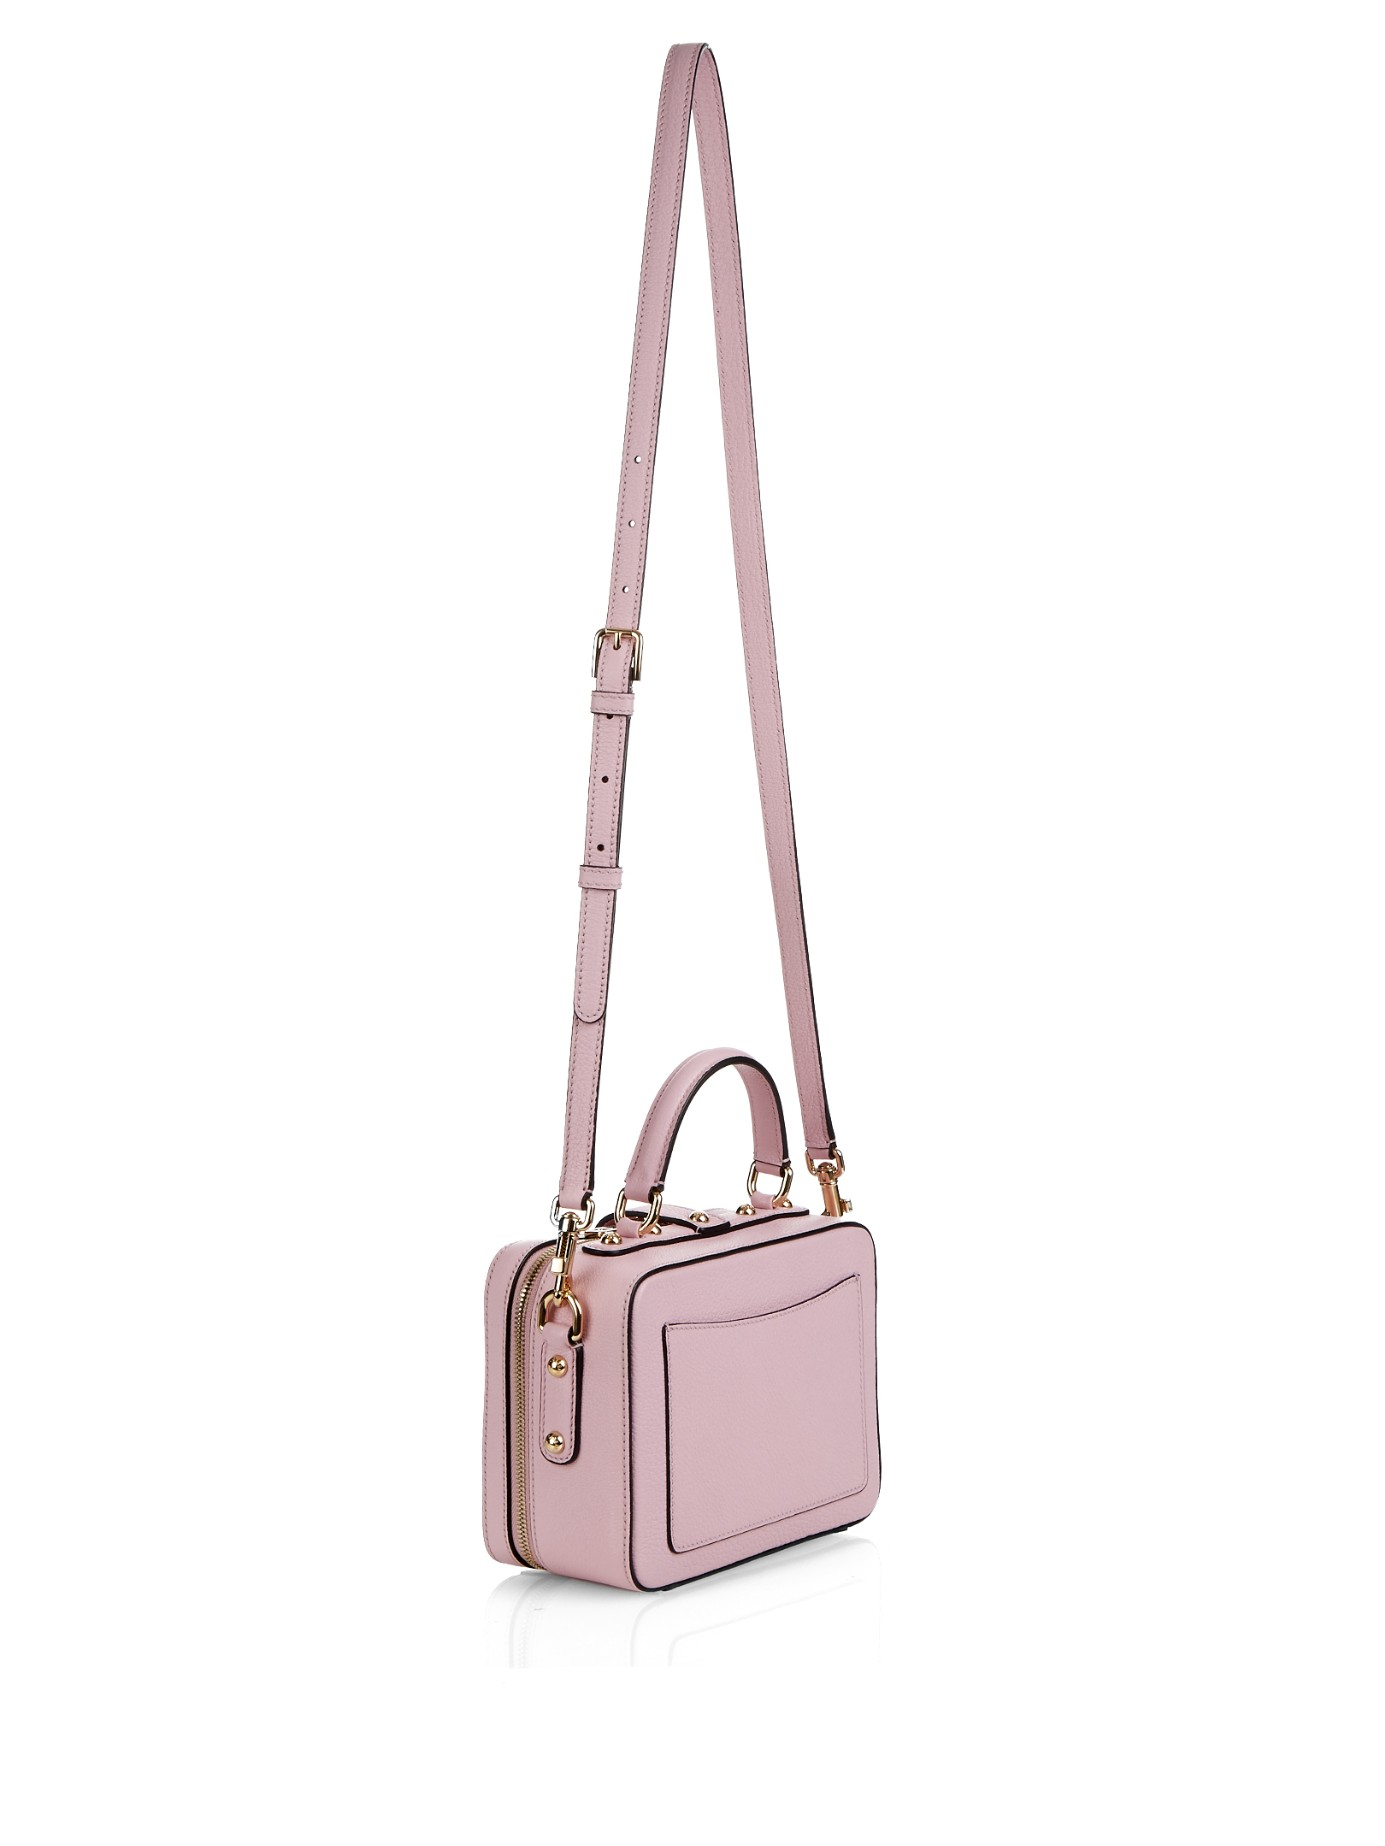 Dolce & Gabbana Rosaria Leather Box Bag in Pink | Lyst